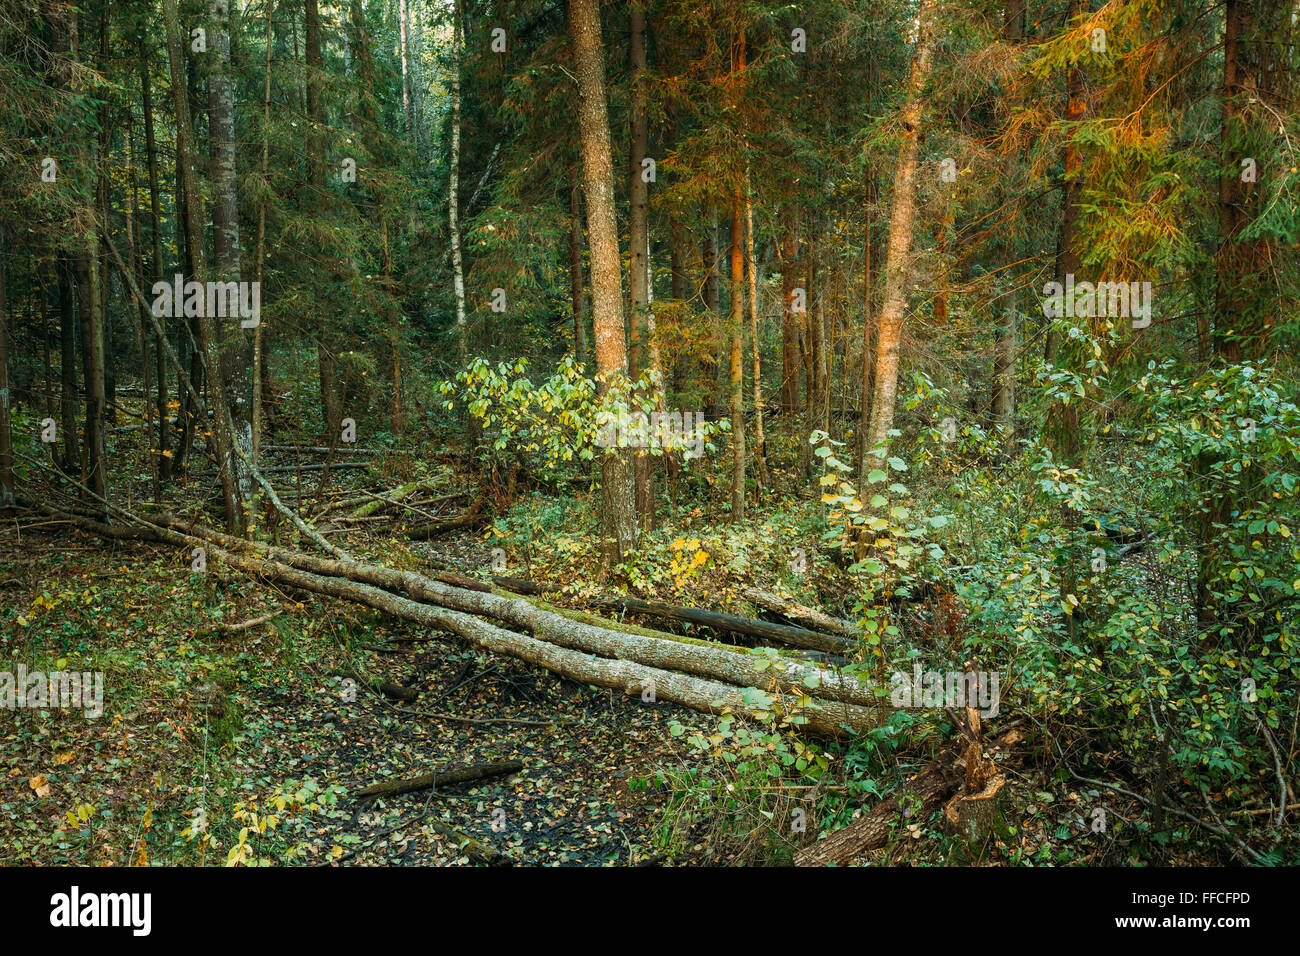 Wild autumn forest. Fallen trees in forest reserve at sunset. Stock Photo